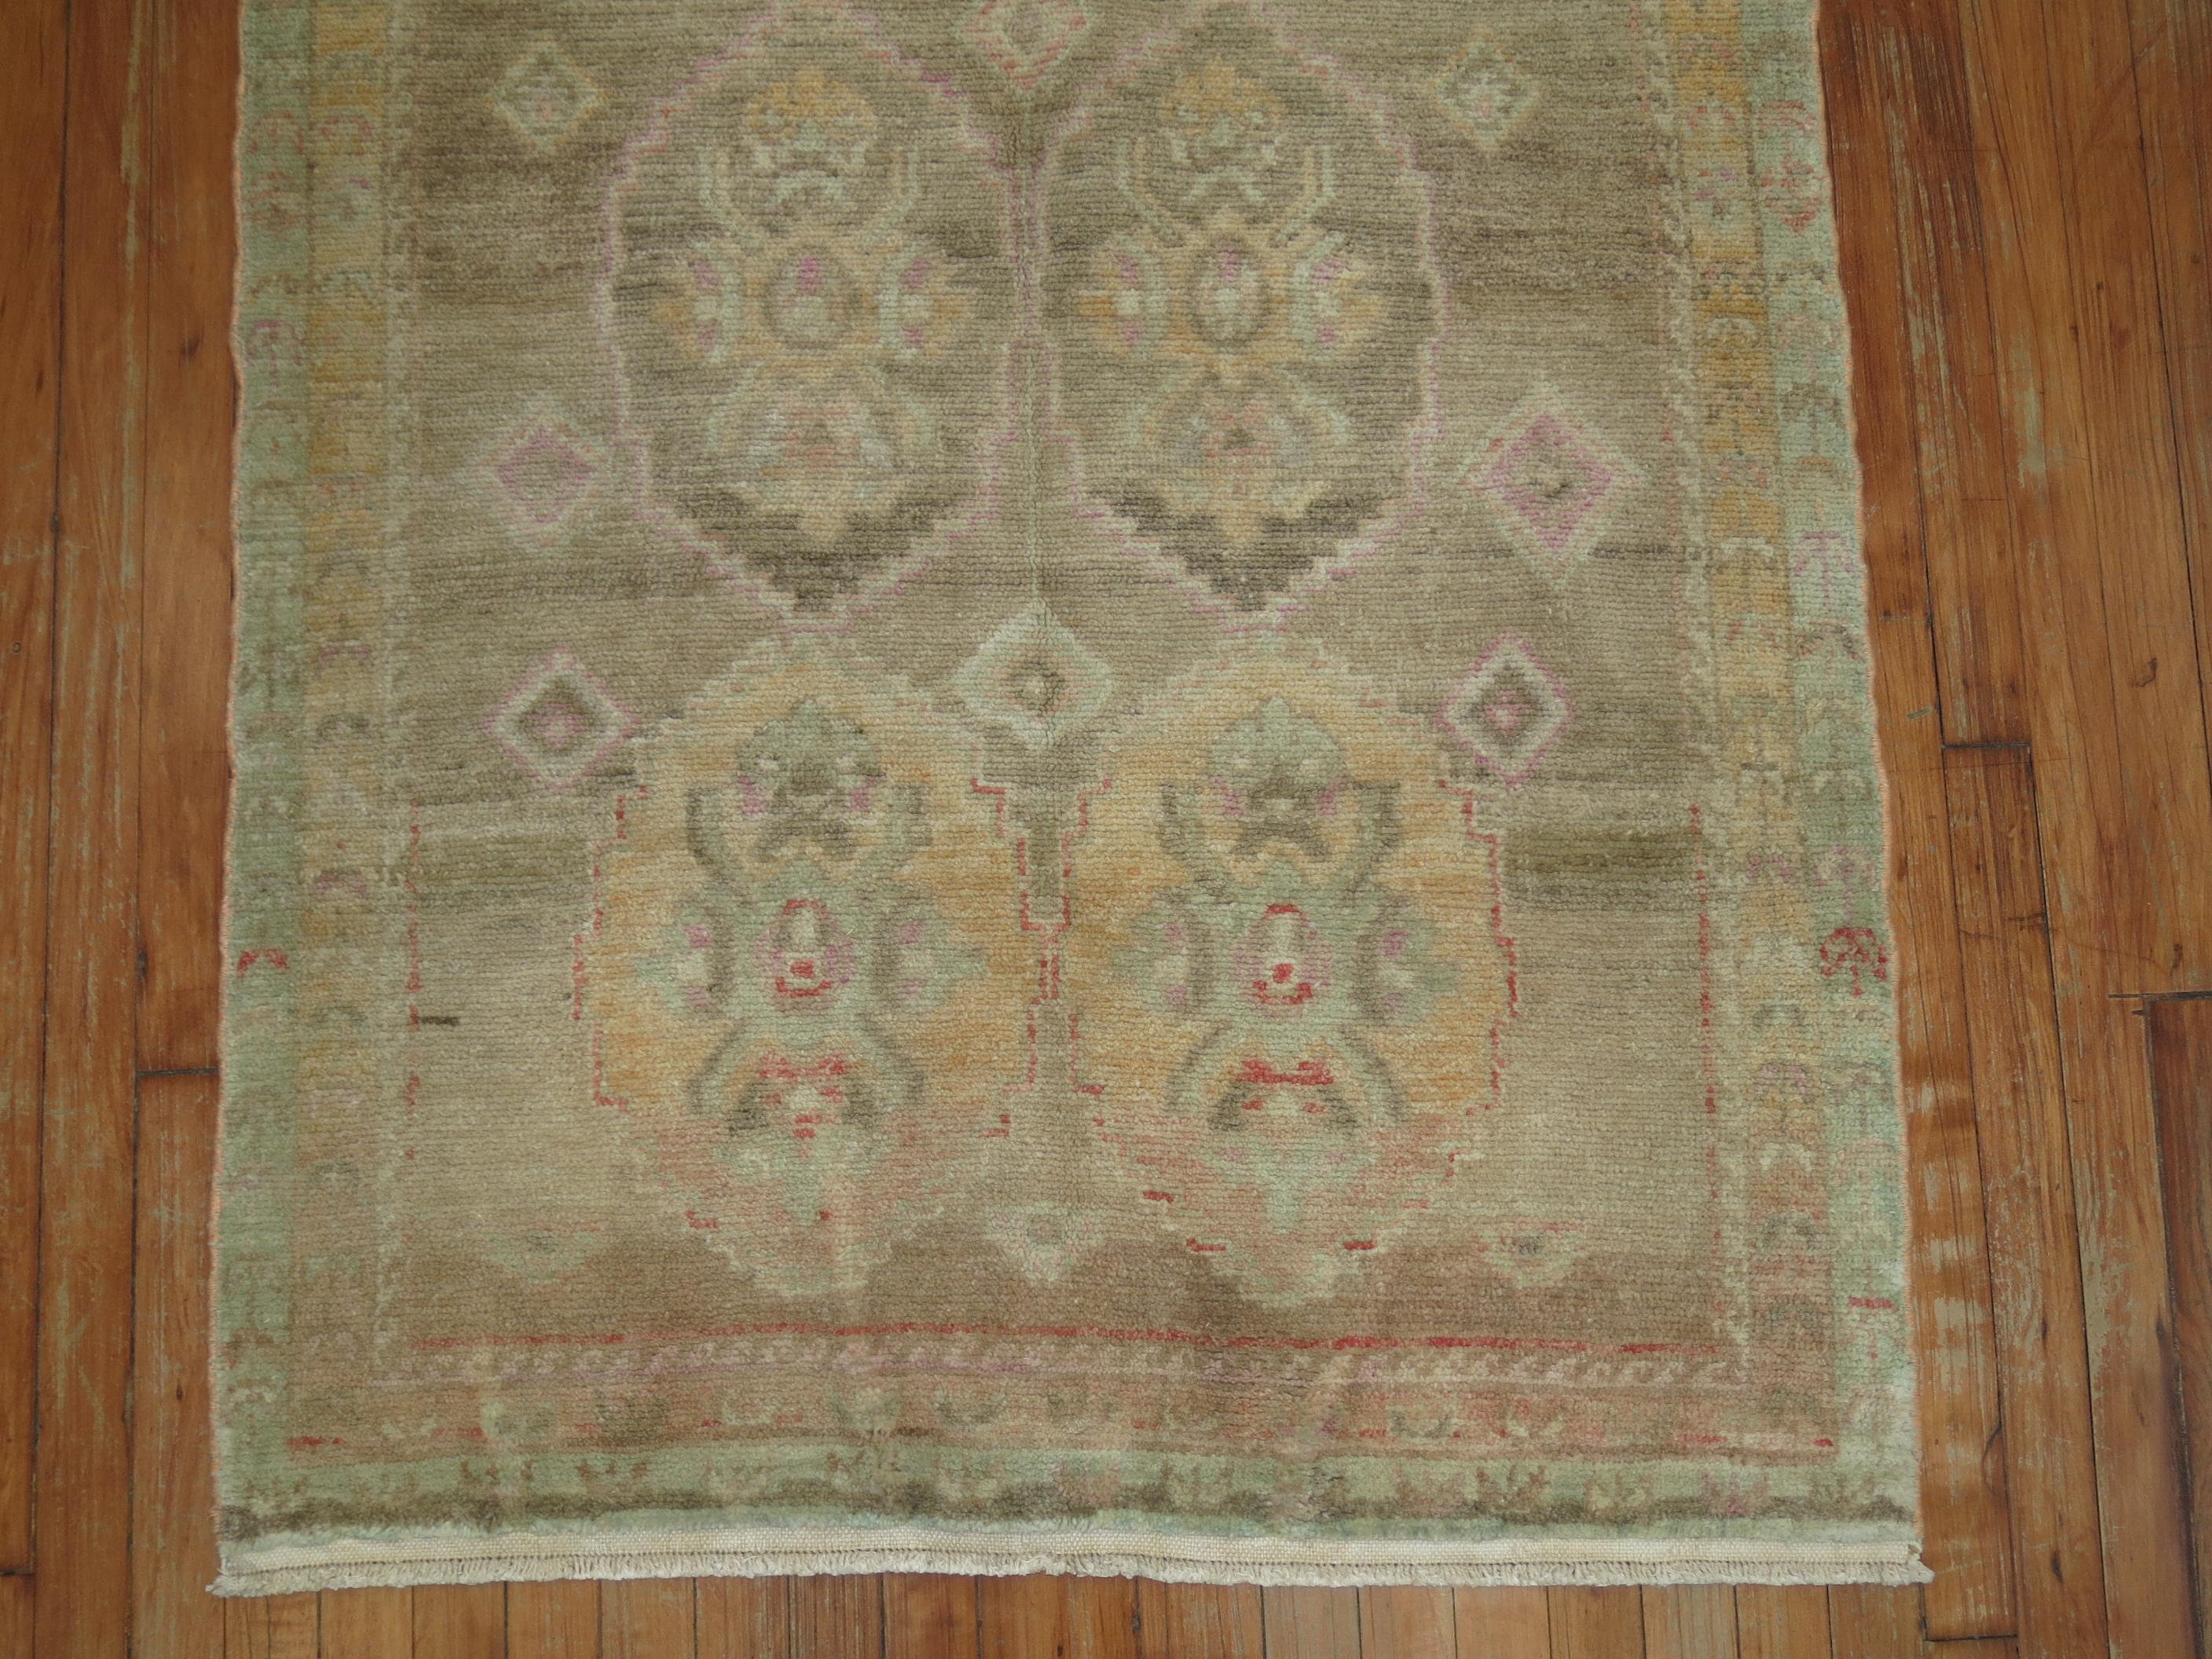 Turkish runner with a beige field, accents in browns and pink.

Measures: 3'6